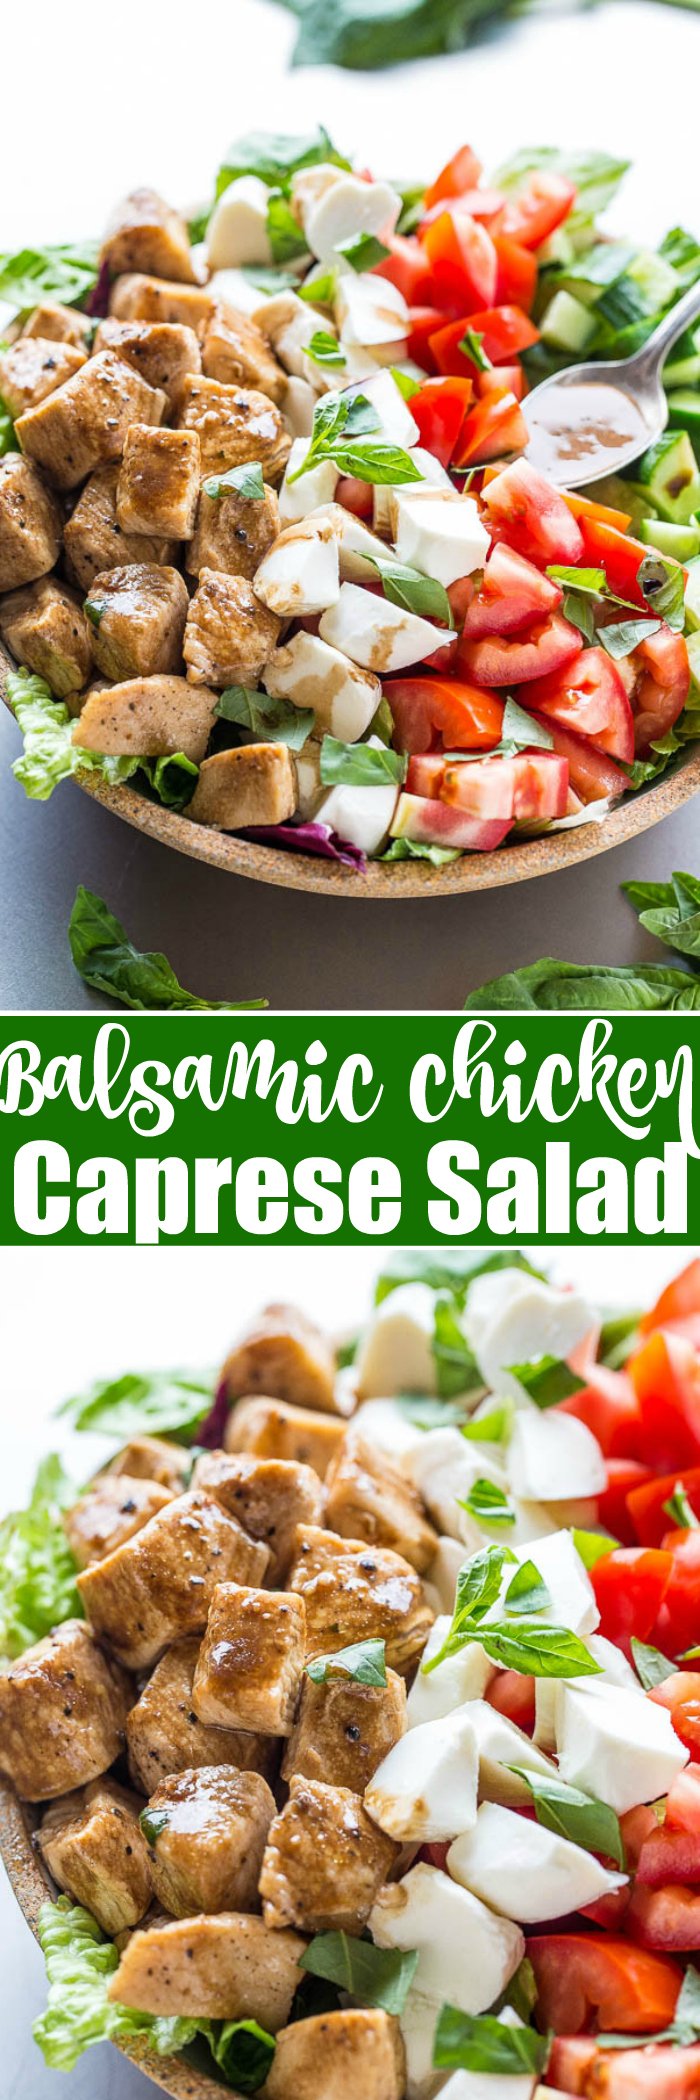 Balsamic Chicken Caprese Salad - Juicy chicken coated in balsamic along with plump tomatoes, creamy mozzarella, and basil!! Easy, healthy, ready in 15 minutes! The caprese salad you'll make AGAIN and again!!